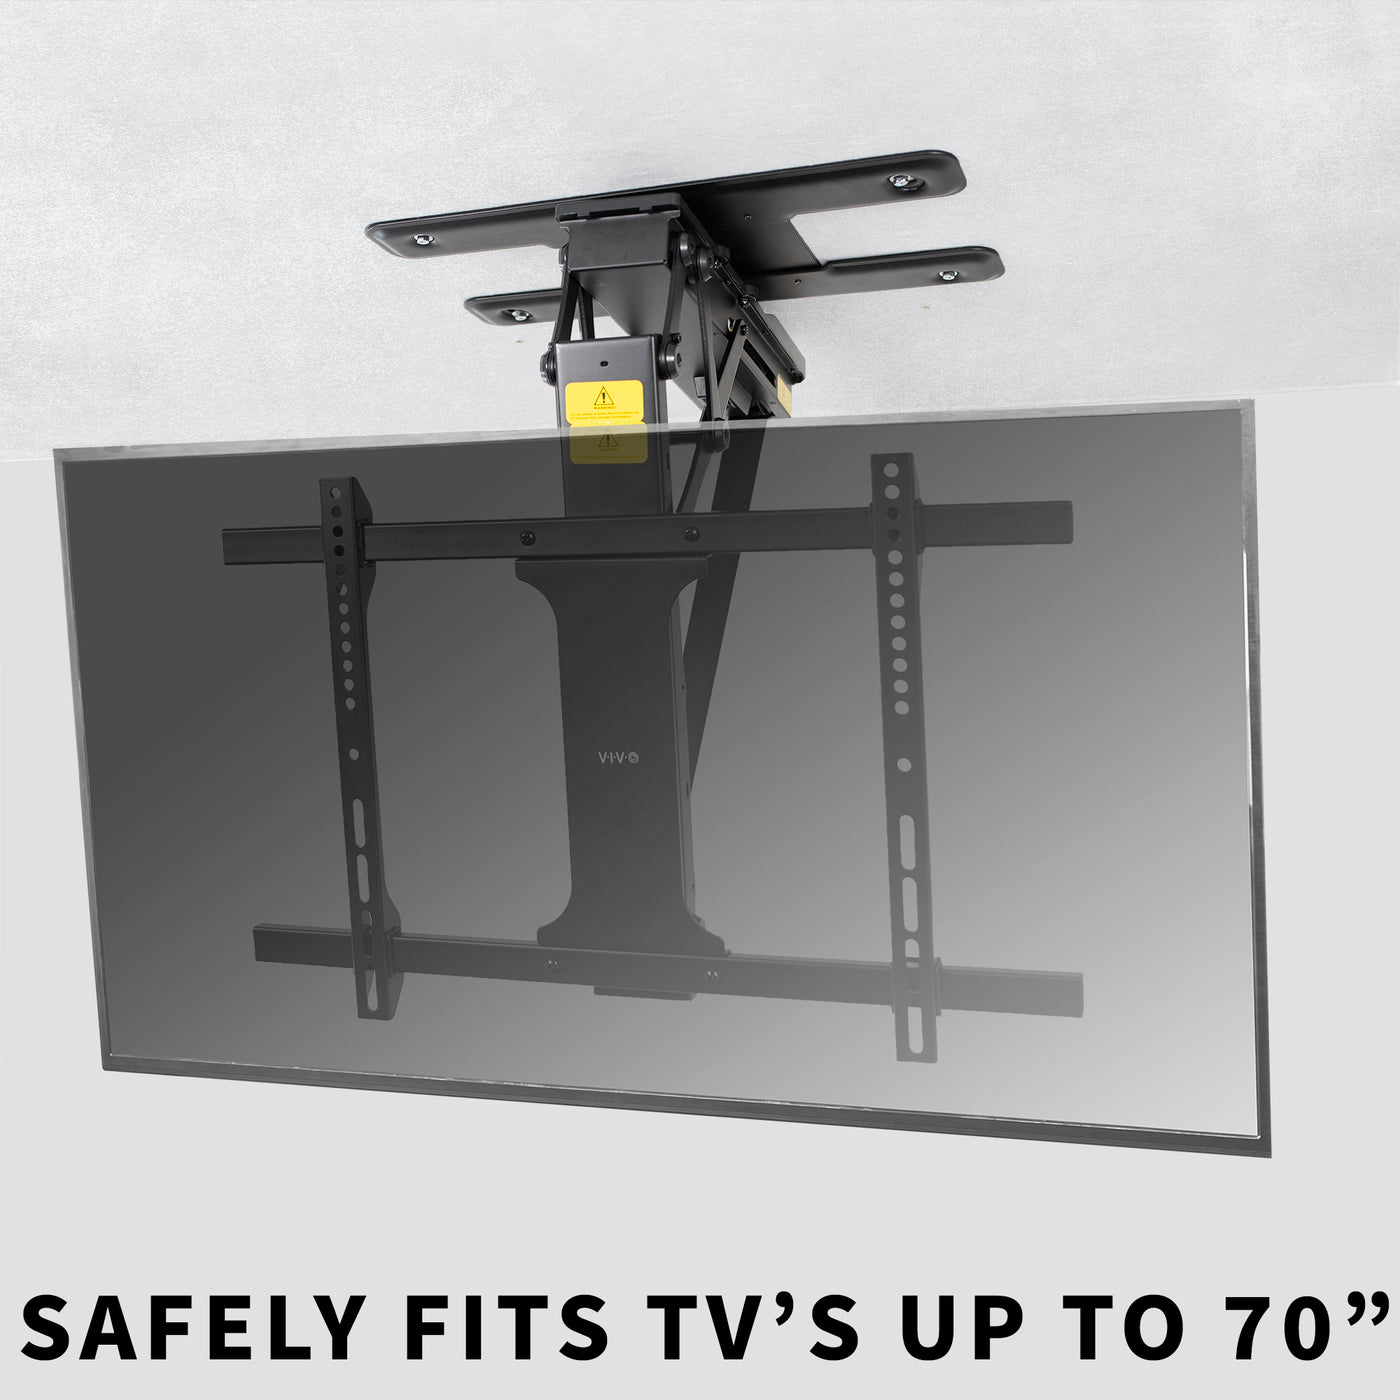  Electric Flip Down Swiveling Ceiling TV Mount for 32 to 70 inch Screens